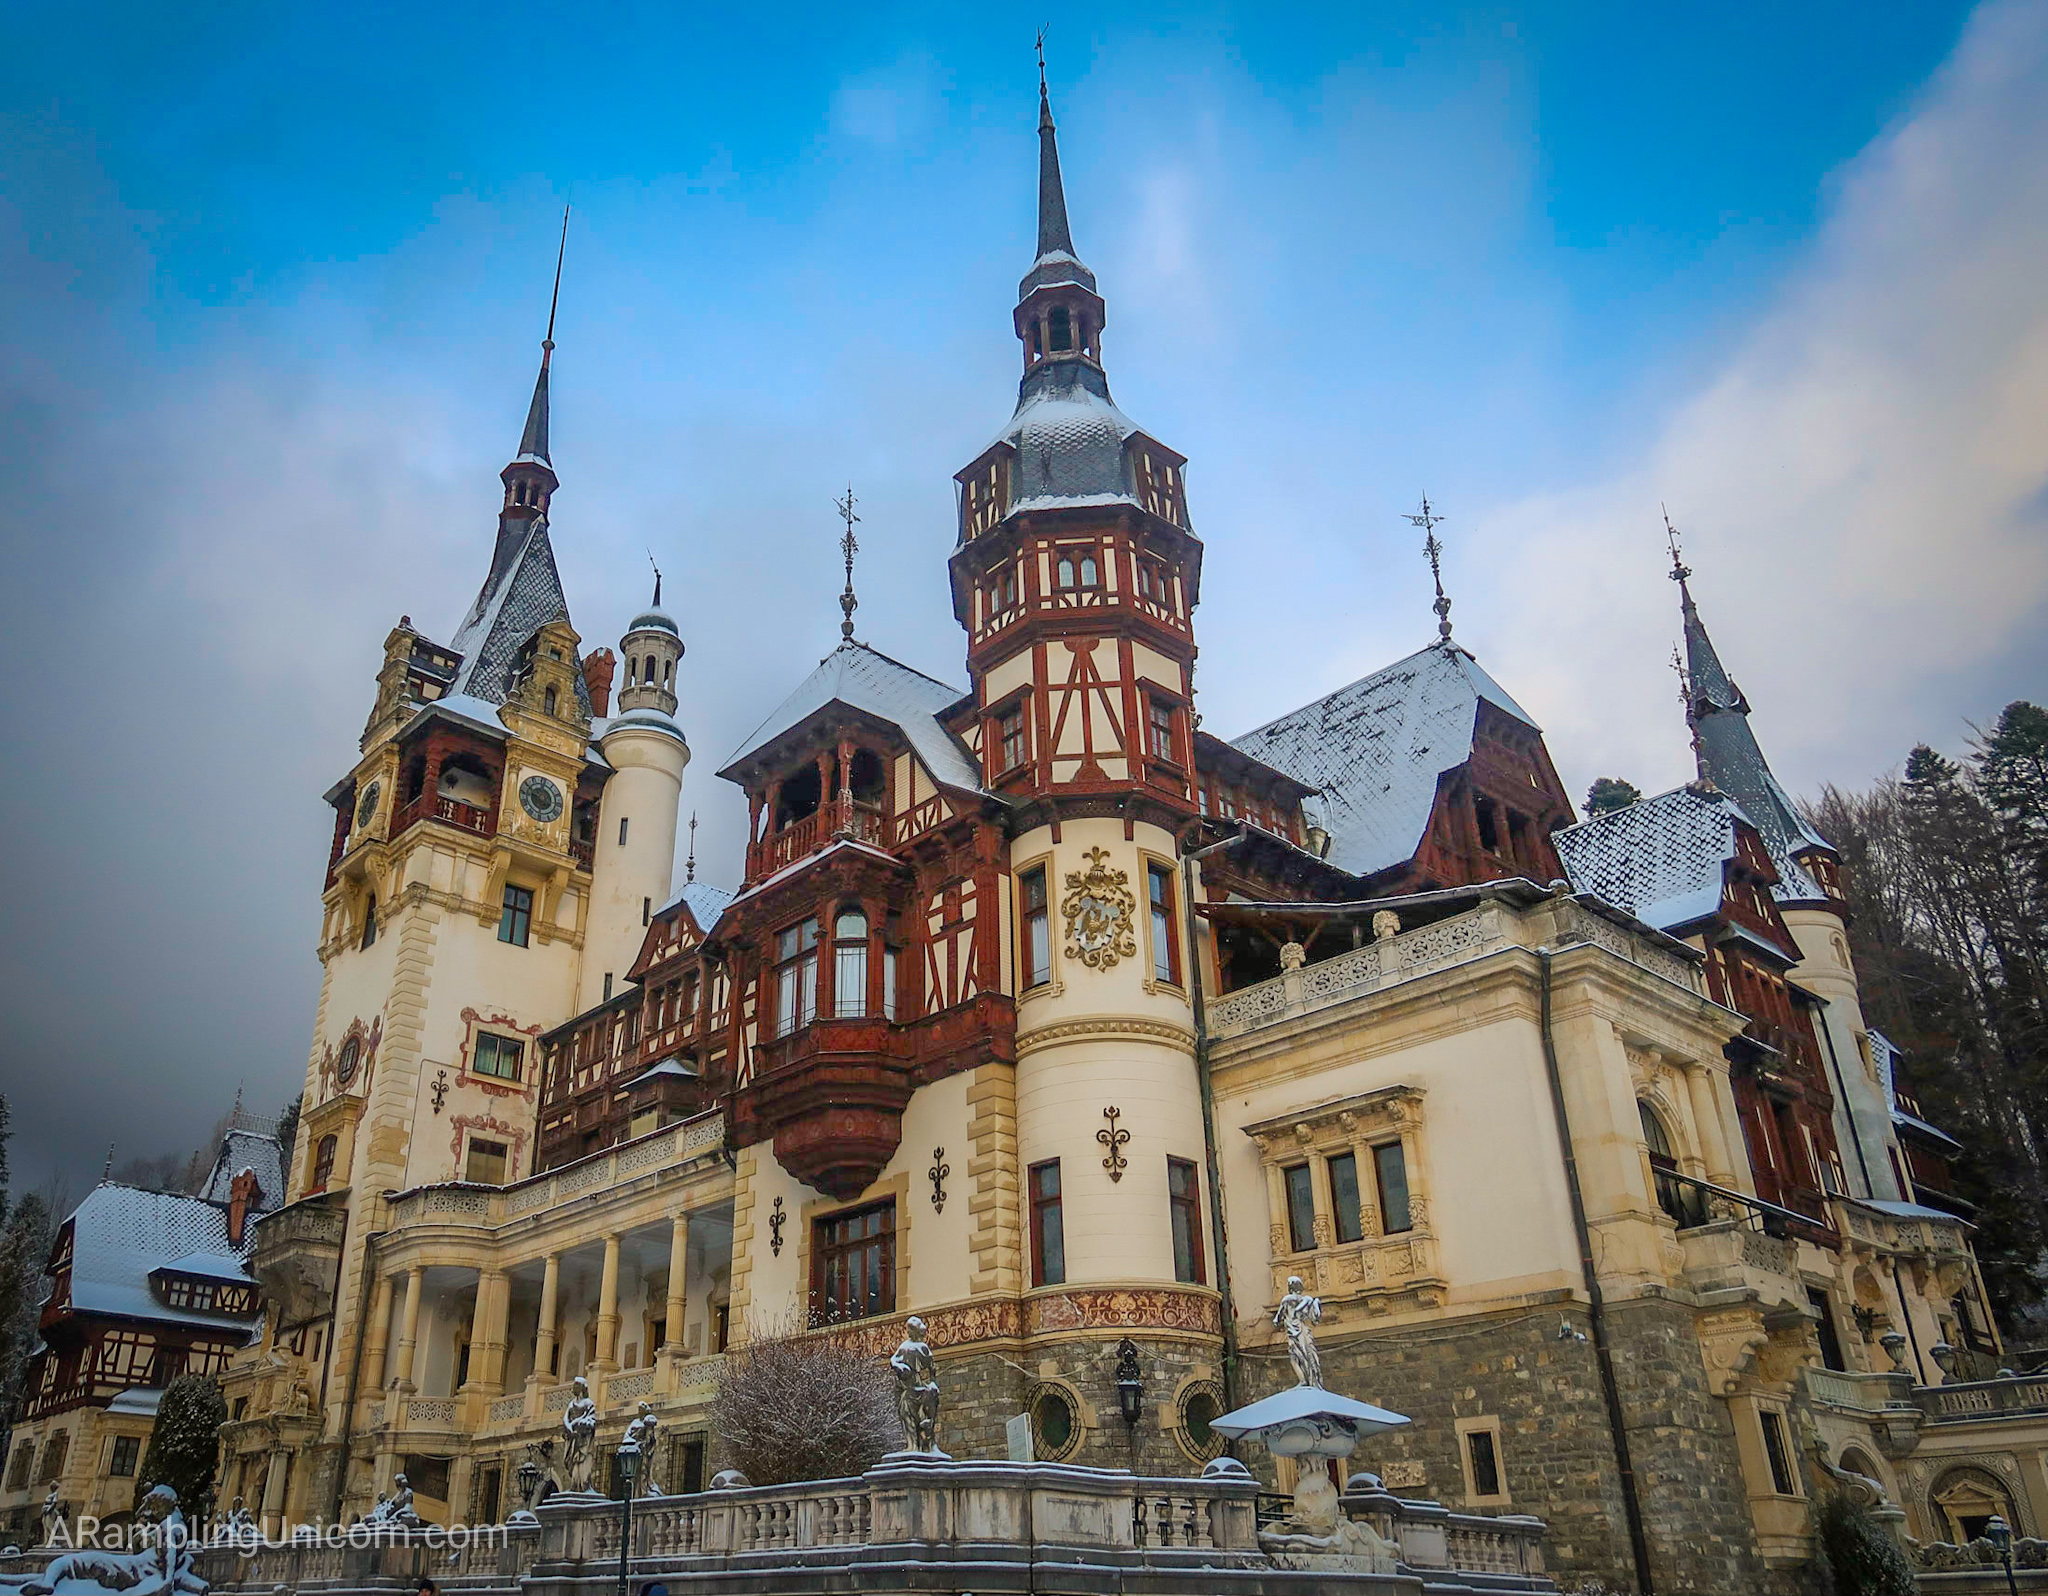 Things to do in Transylvania: A Tour of Romania’s Castles